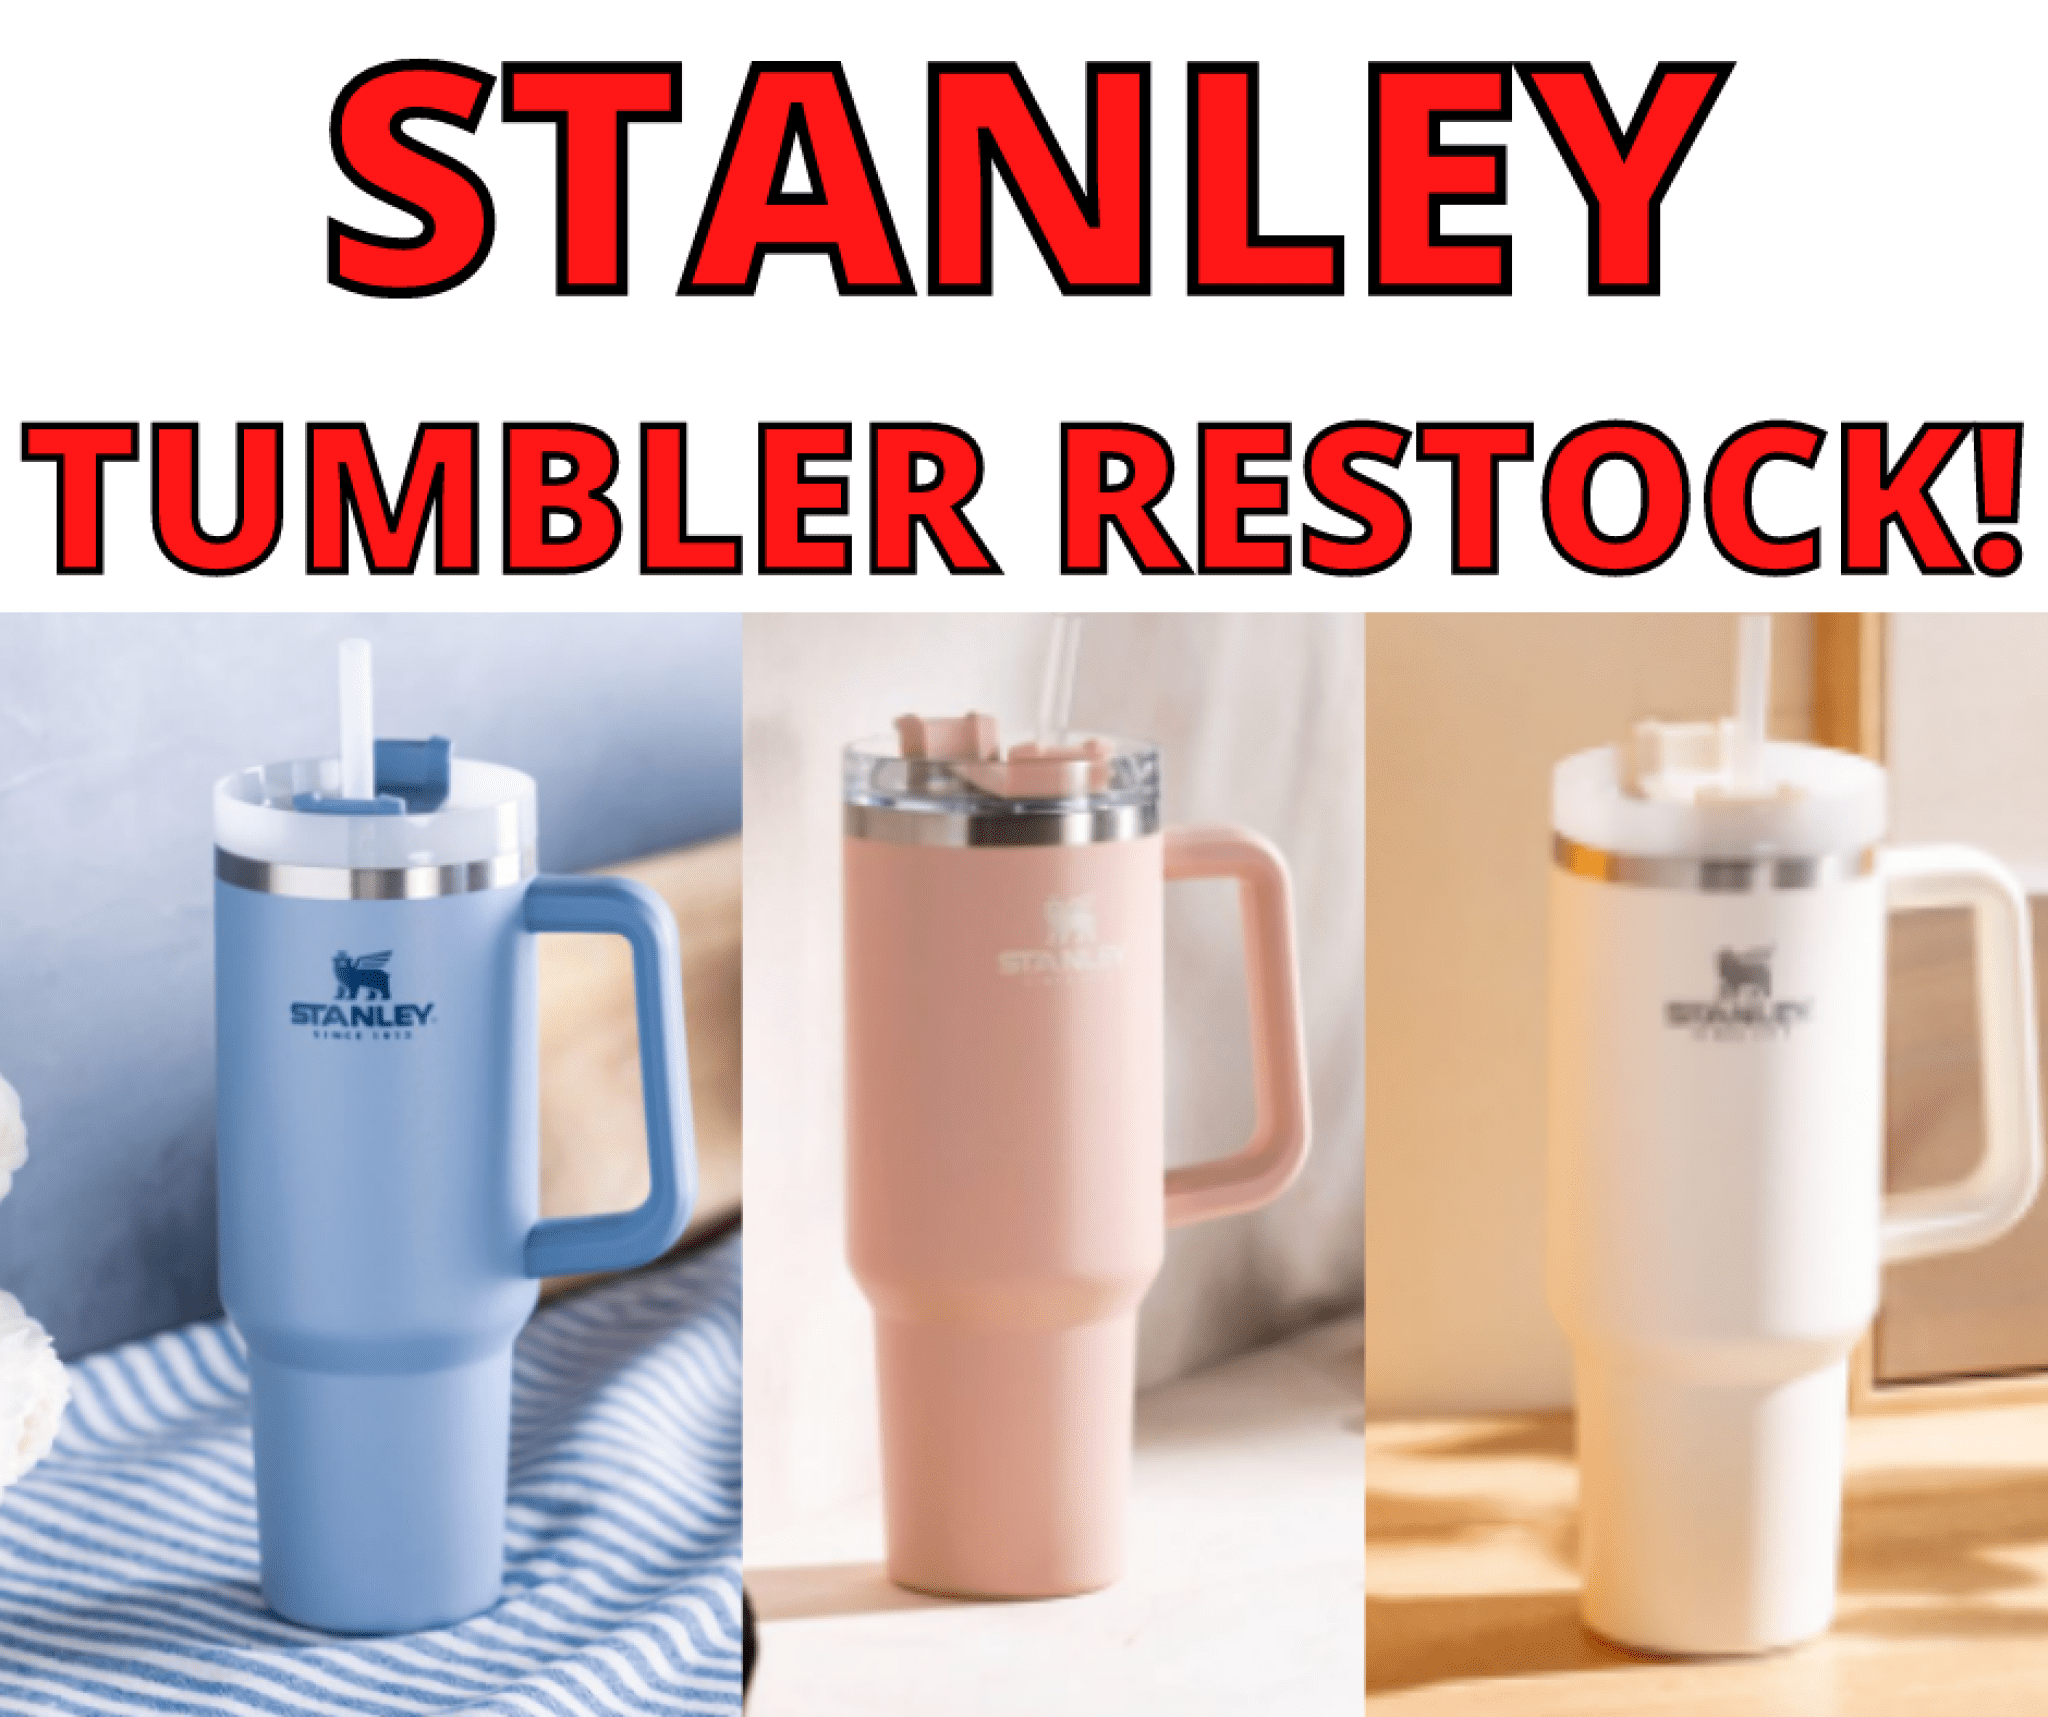 Stanley Quencher Tumbler In Stock At Dicks Sporting Goods 